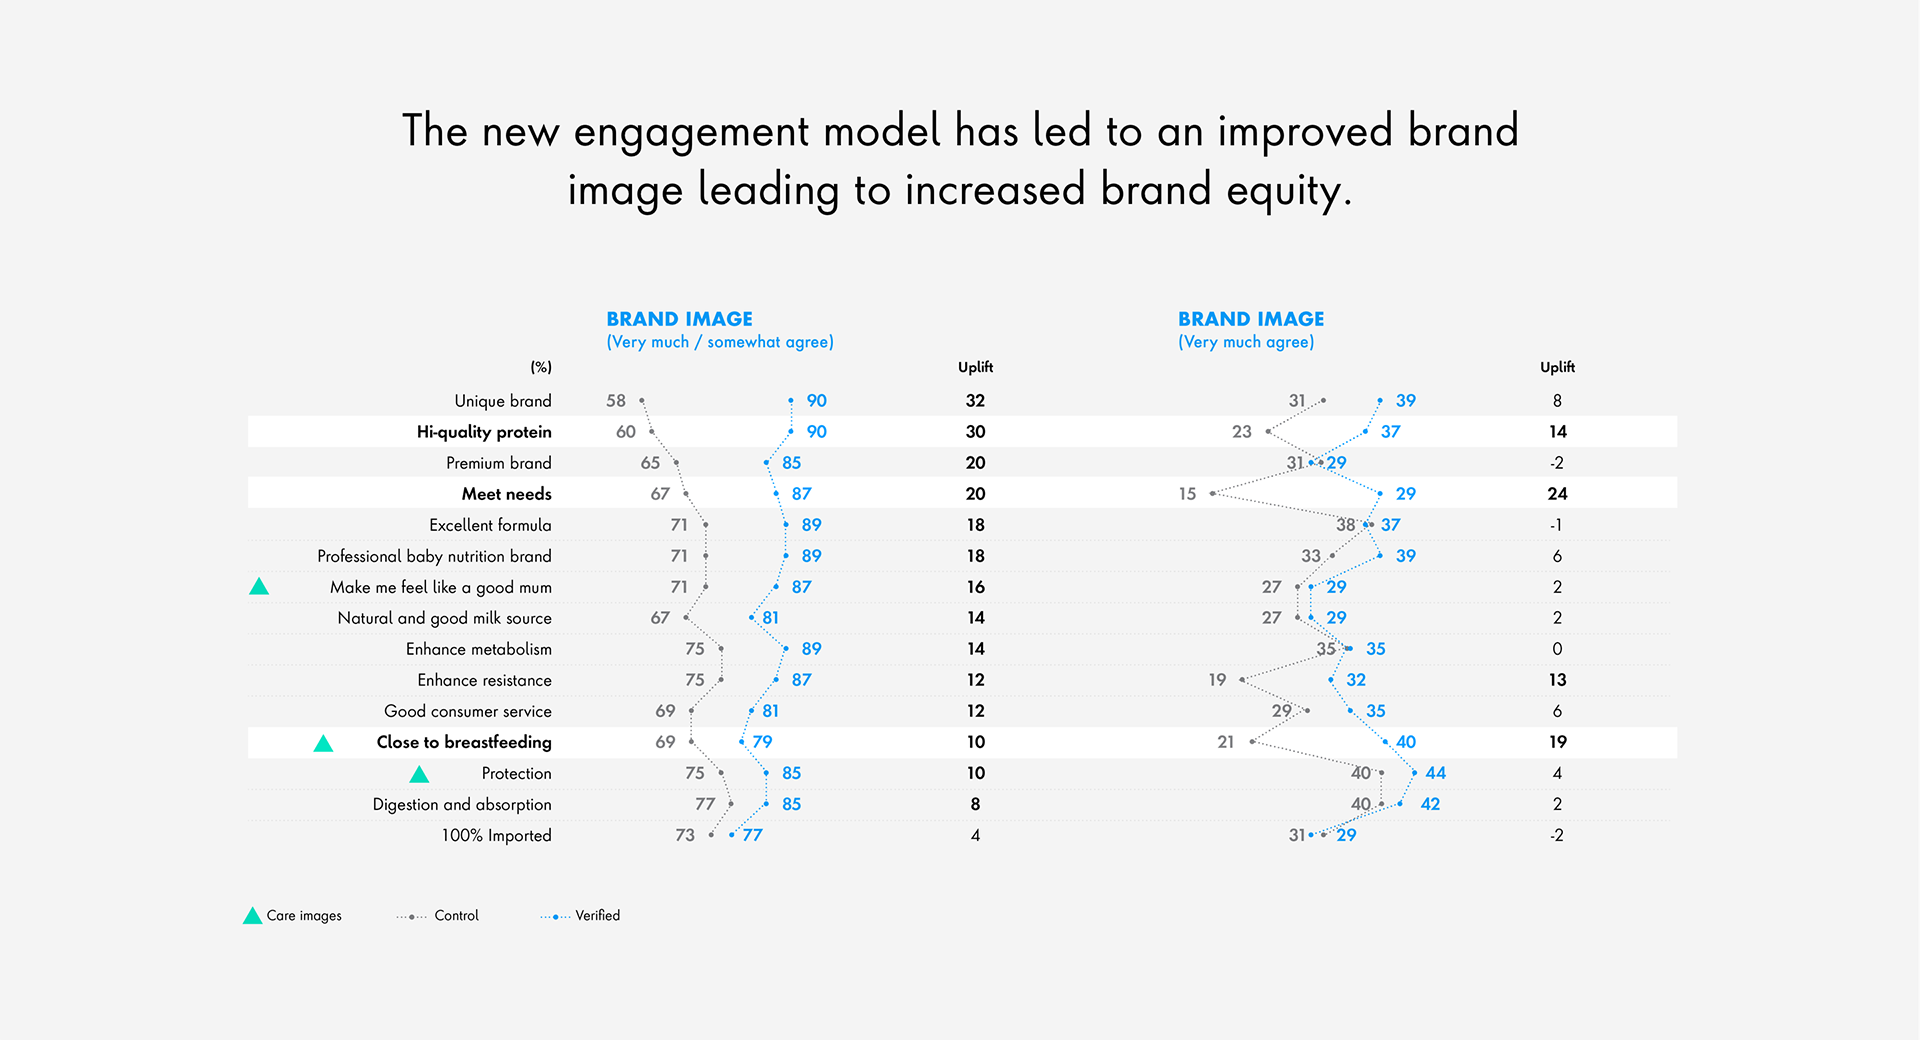 The new engagement model has led to an improved brand image leading to increased brand equity.